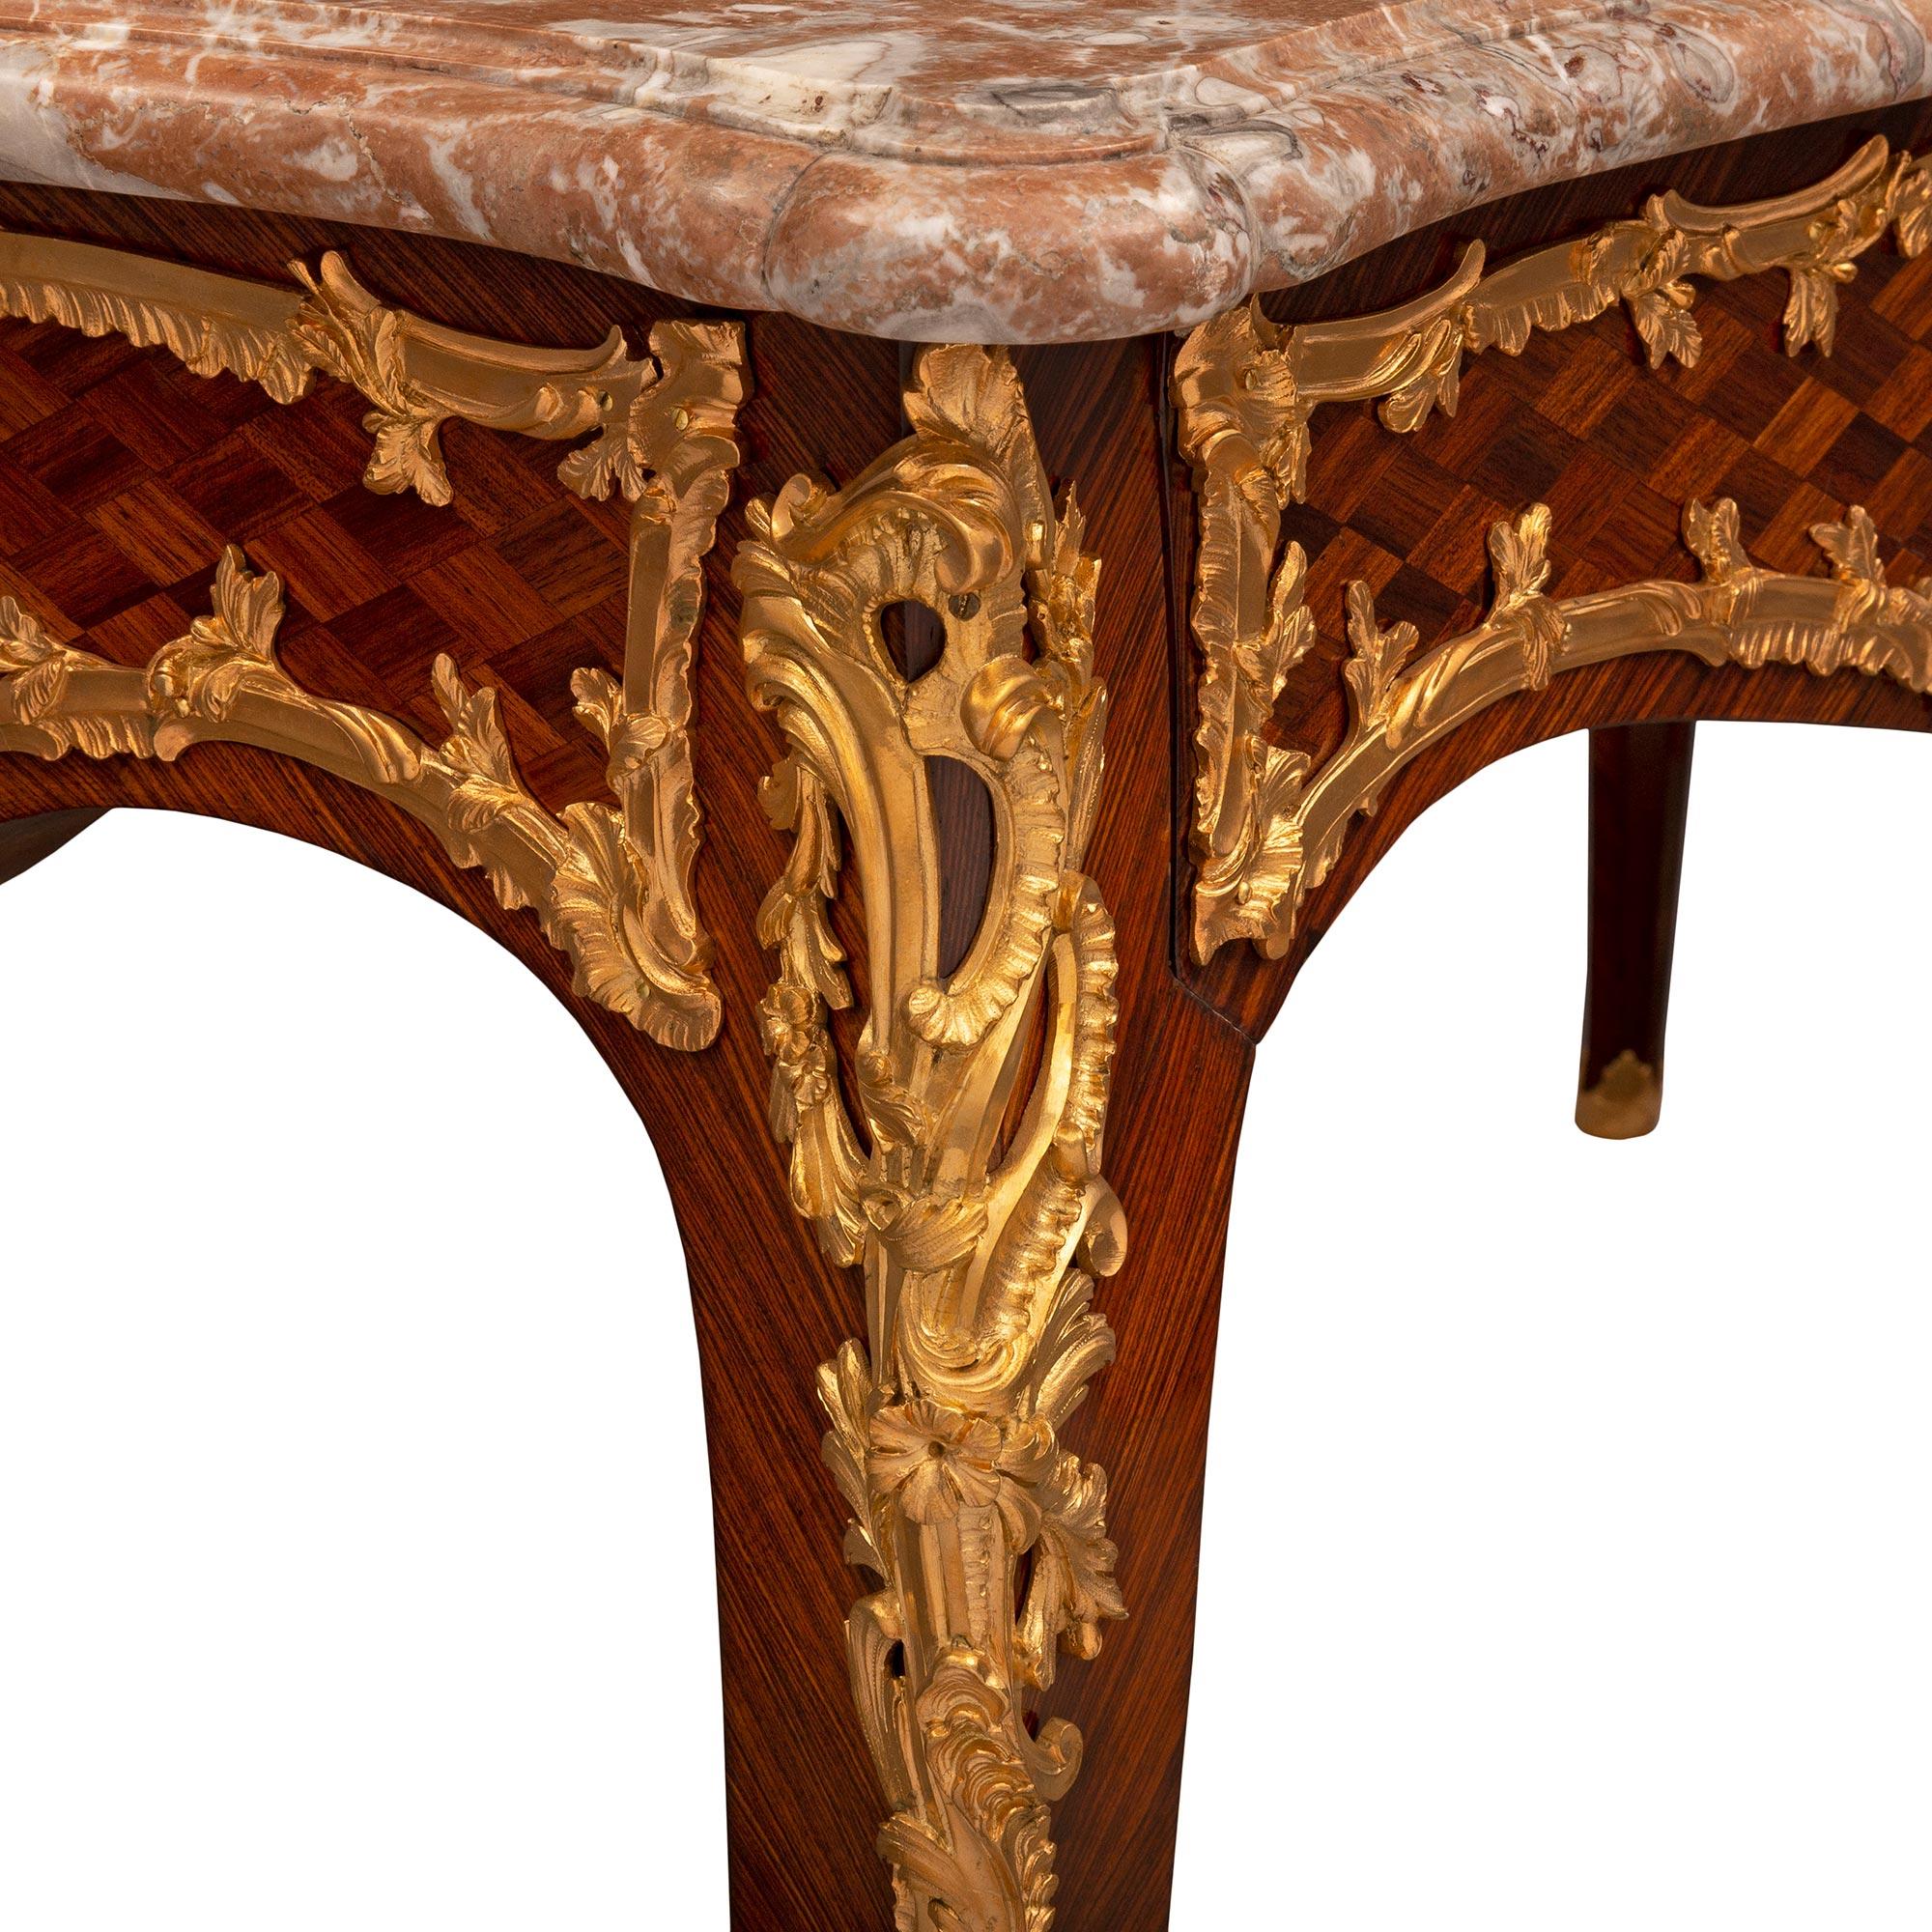 French 19th Century Louis XV Style Tulipwood and Ormolu Center Table For Sale 5